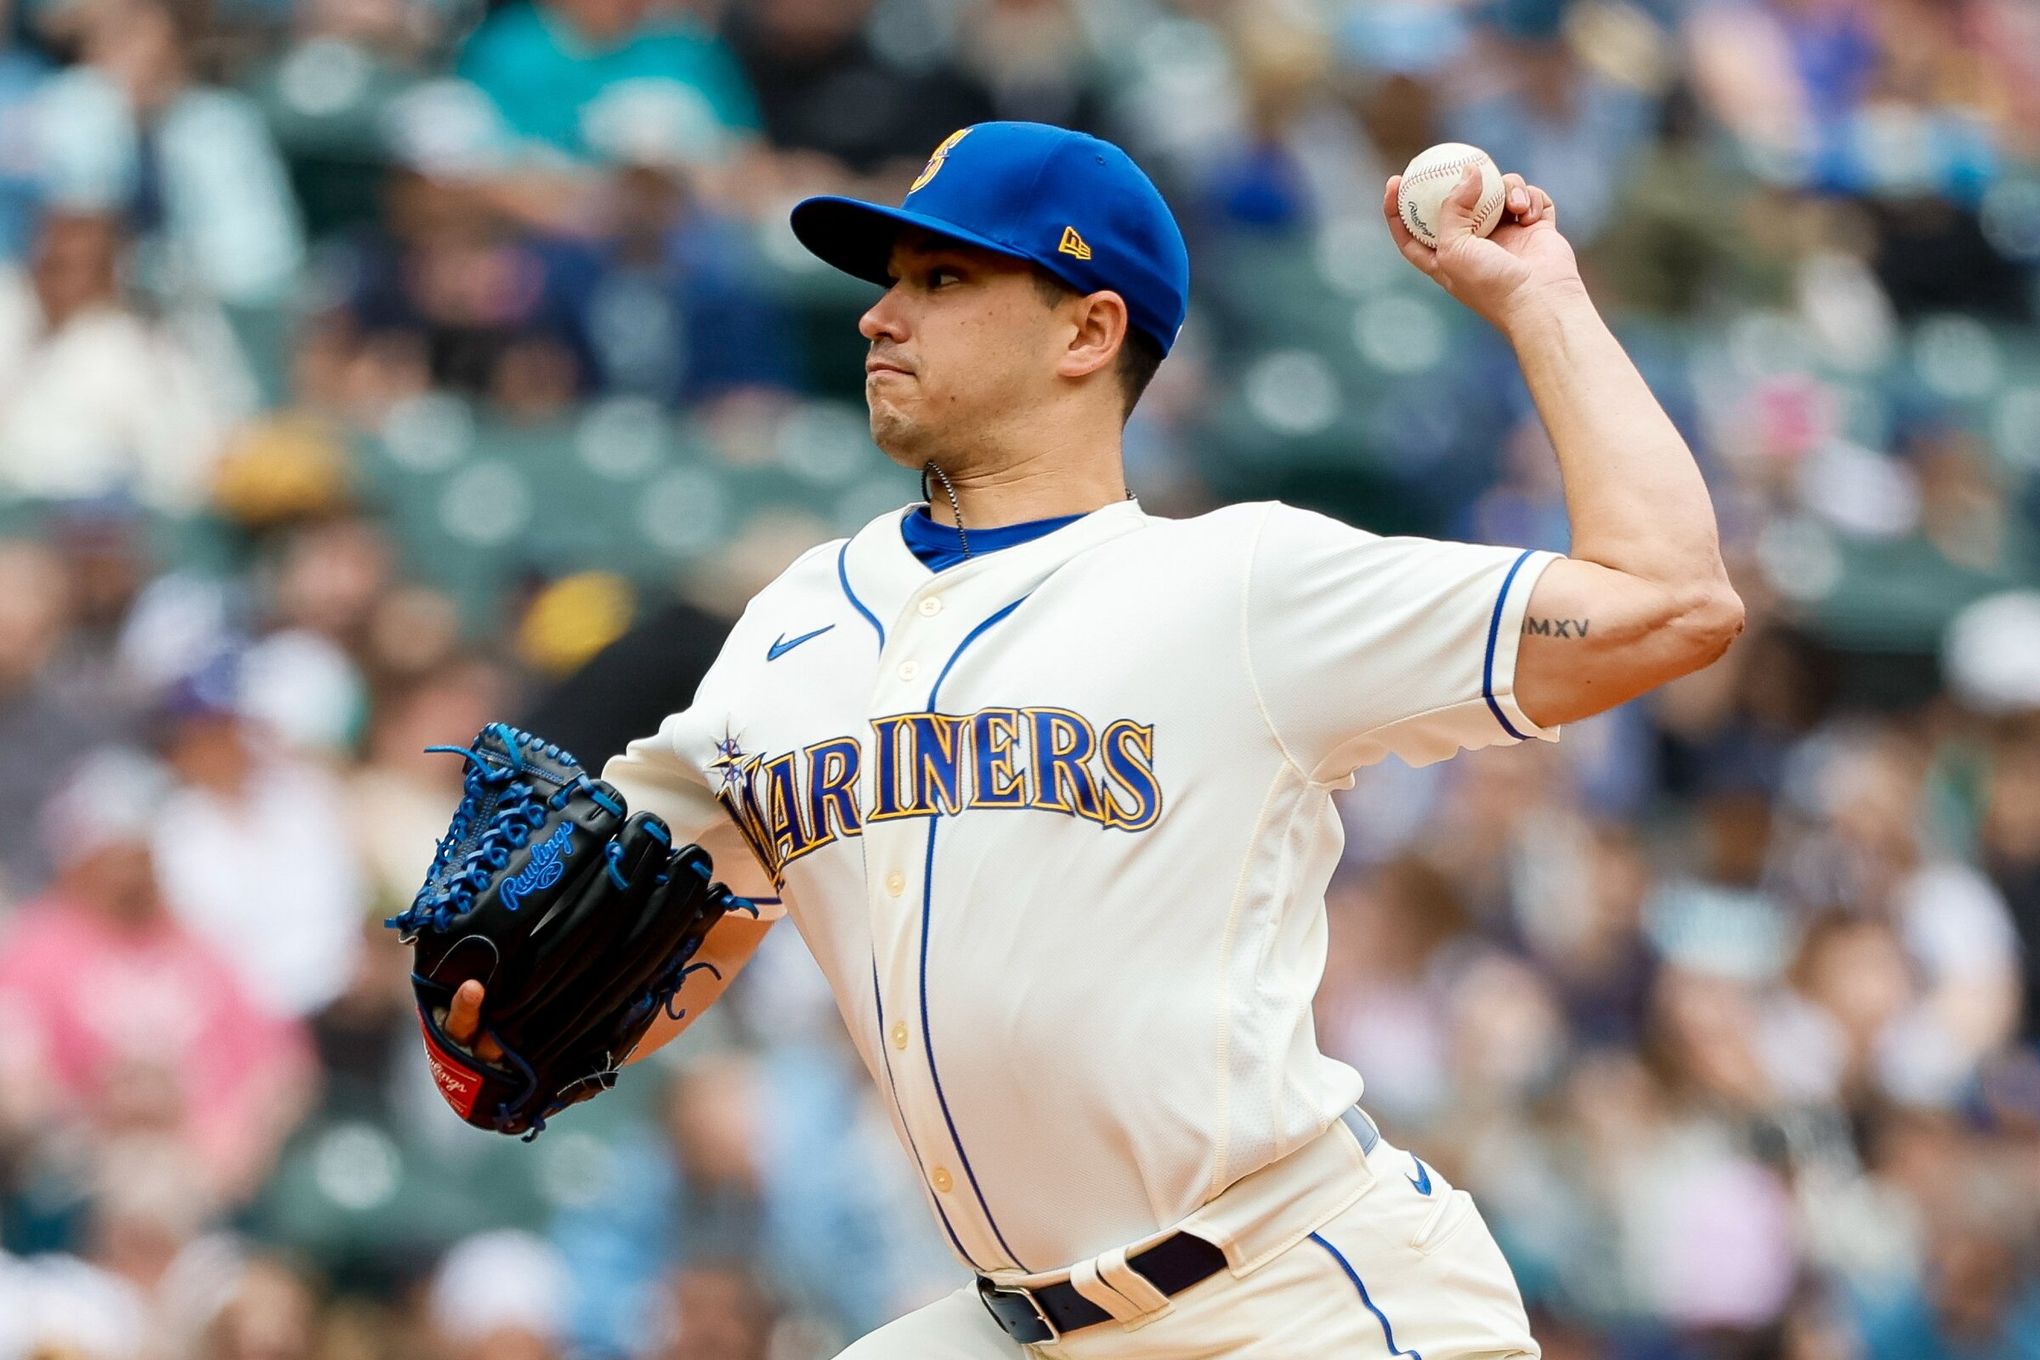 Mariners' Gonzales struggles with command in spring debut - The